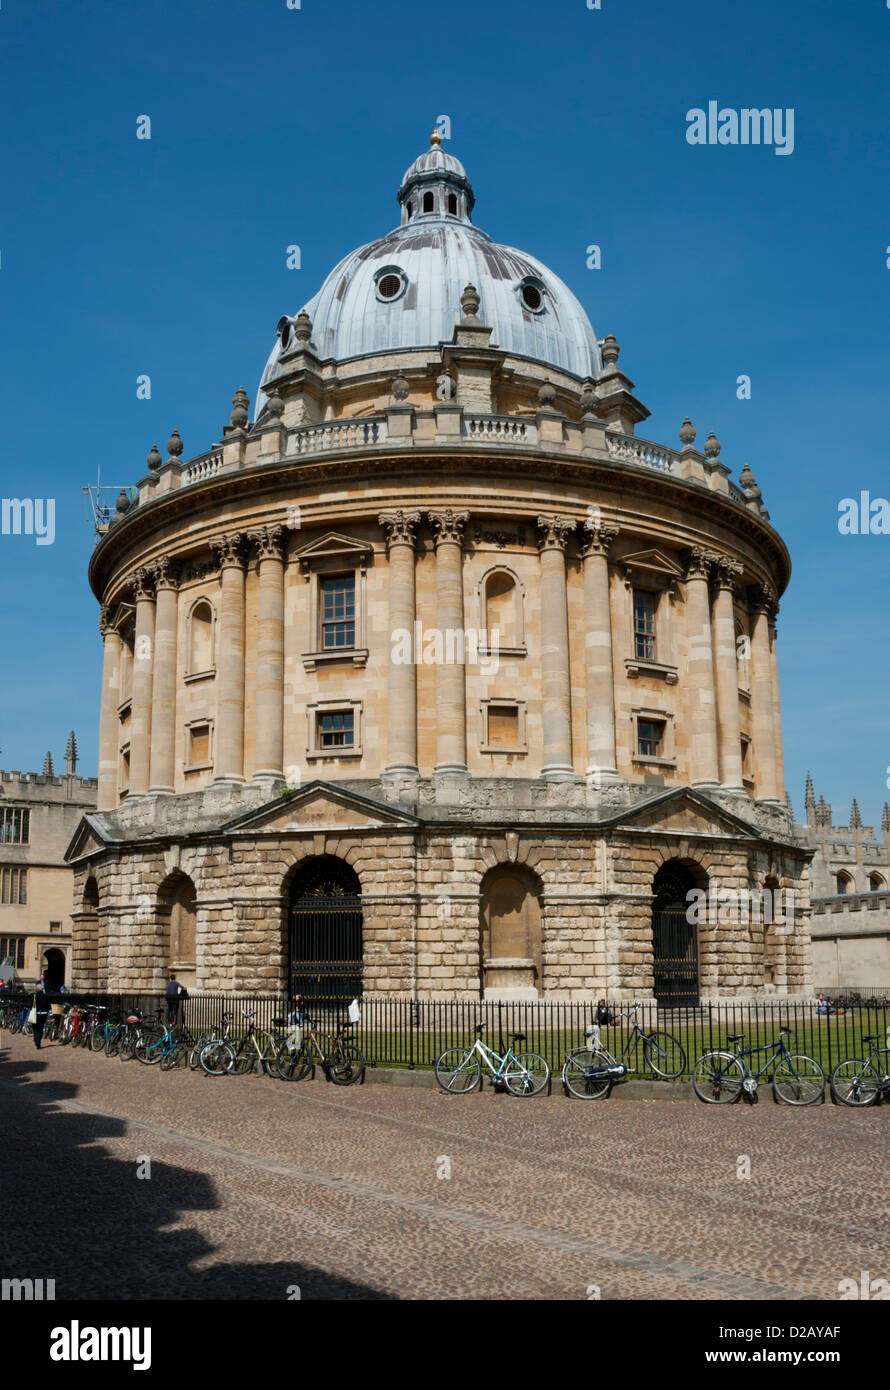 The Radcliffe Camera (built 1737-1749 by James Gibbs) seen from the south-west, Oxford, Oxfordshire, England, UK Stock Photo